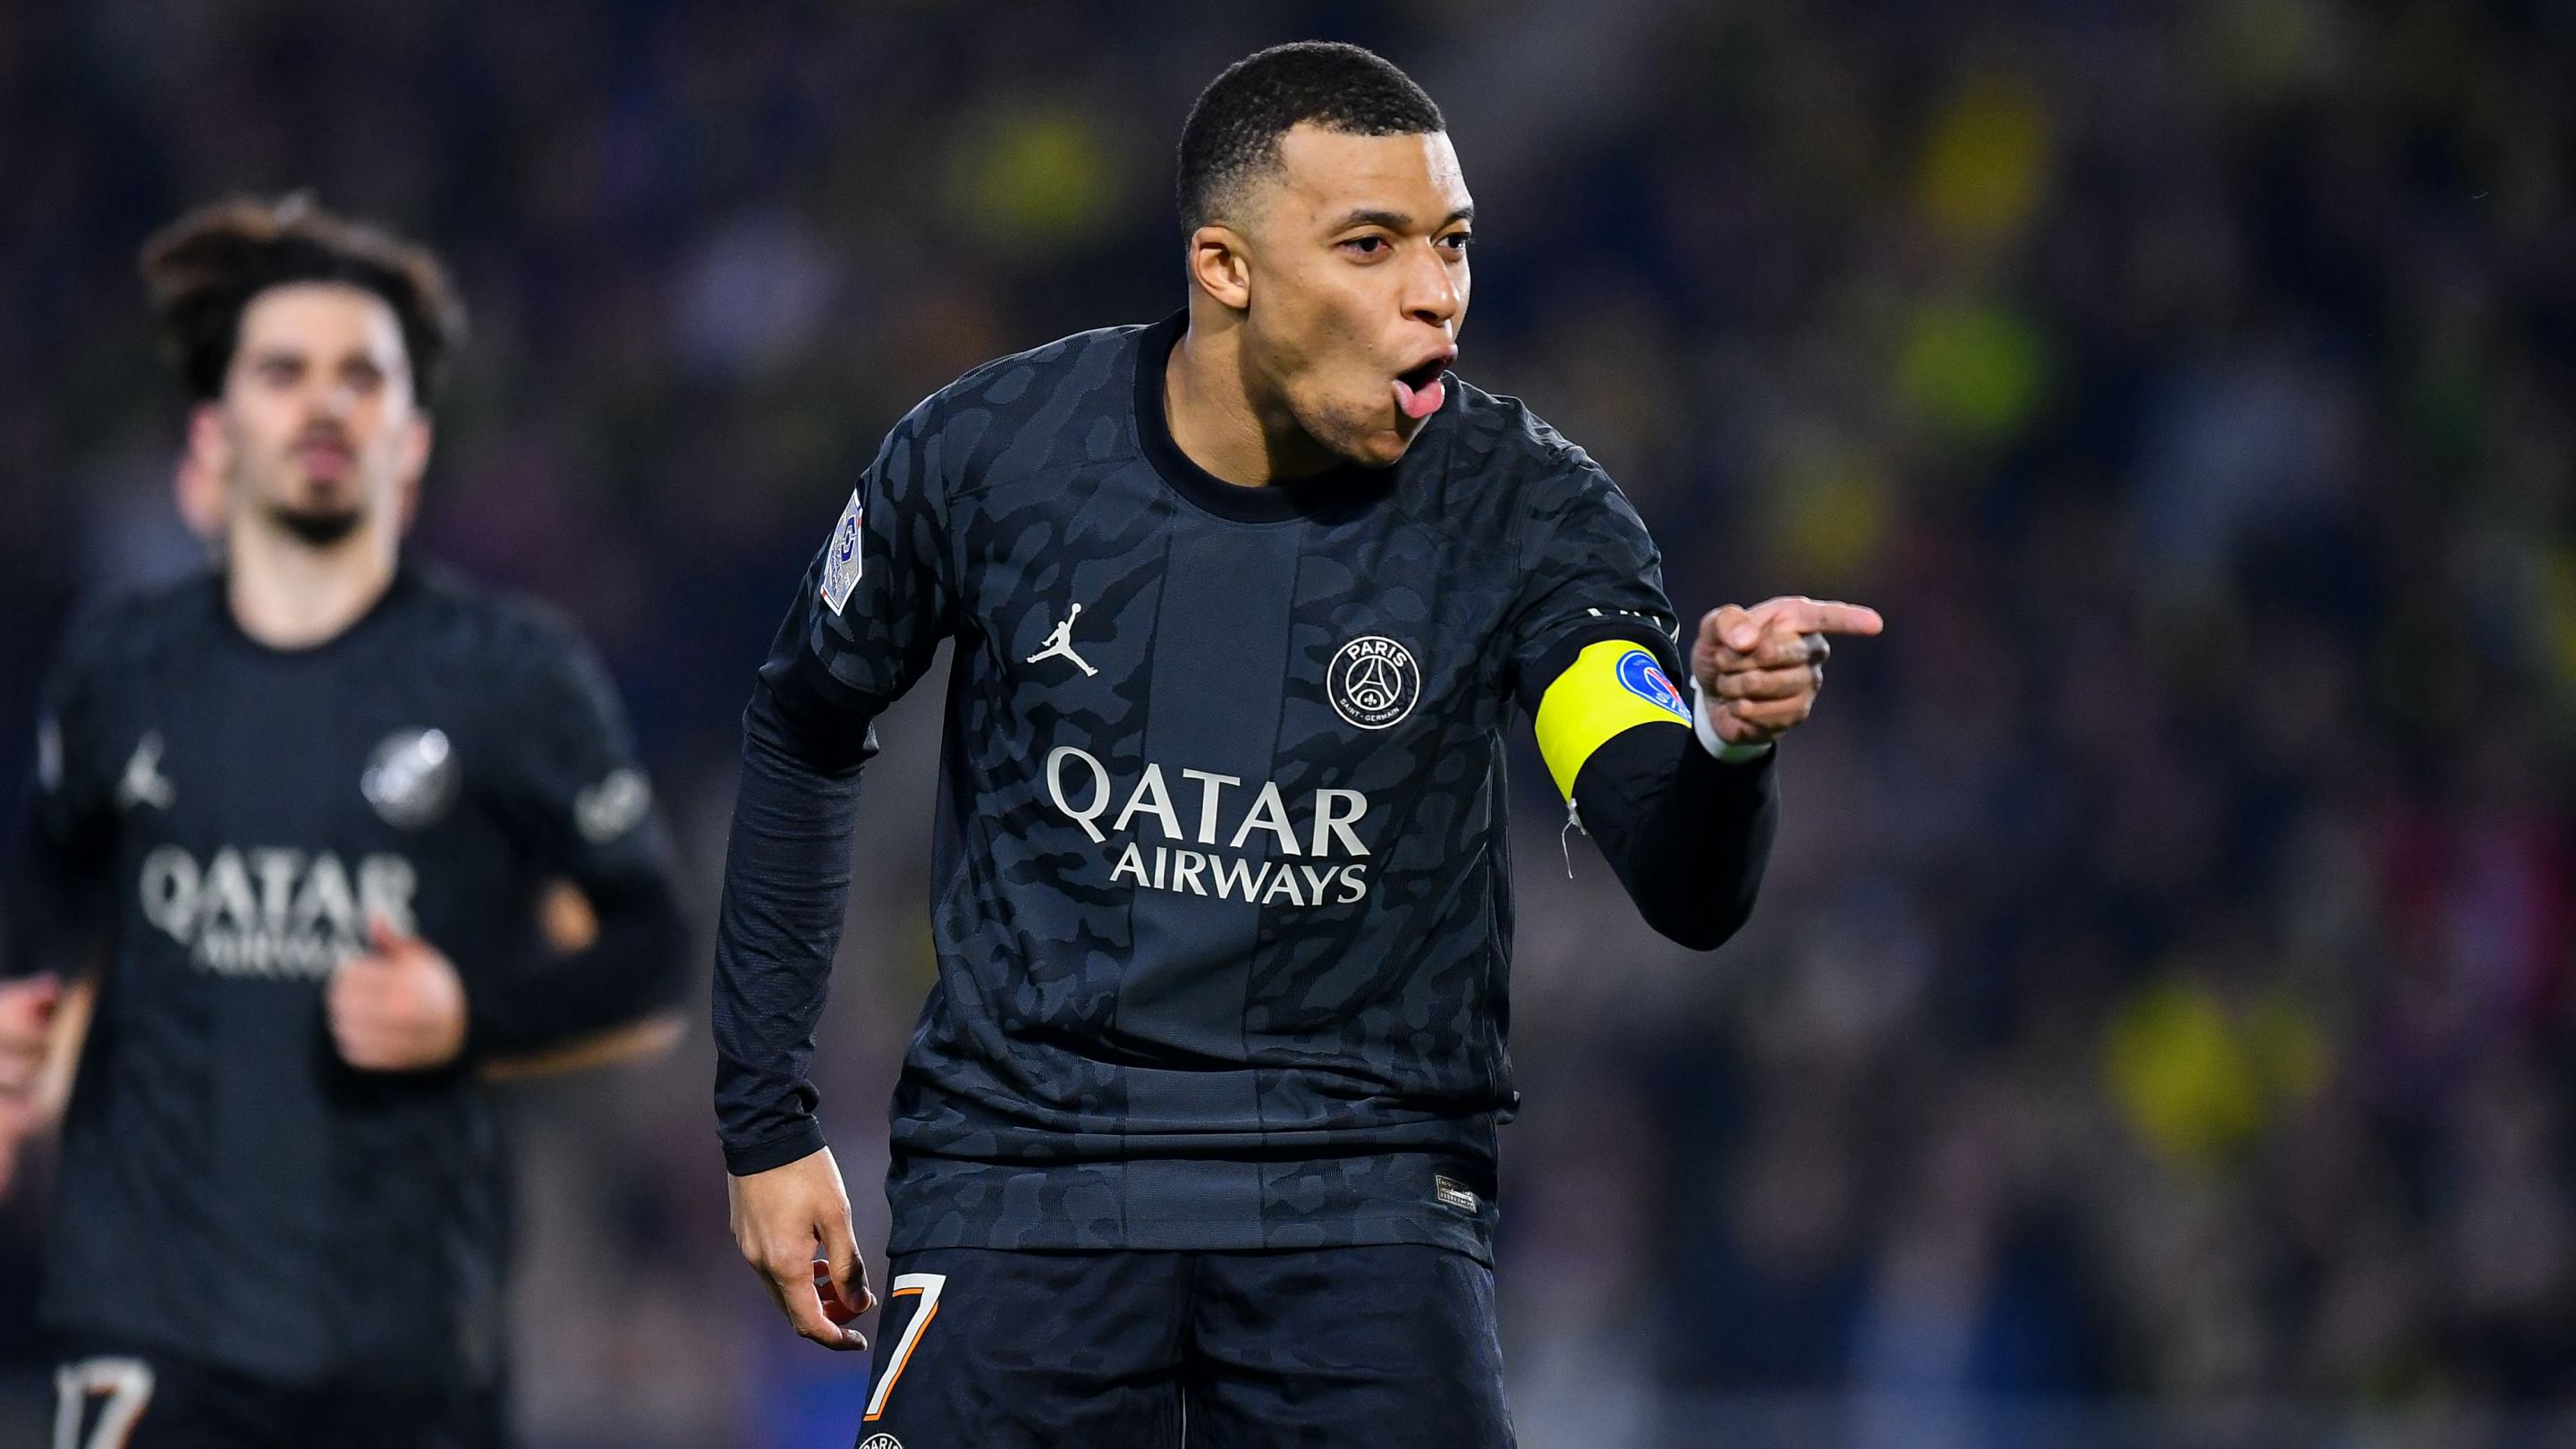 Kylian Mbappe's former teammate reveals which Premier League club PSG star would watch 'every game'